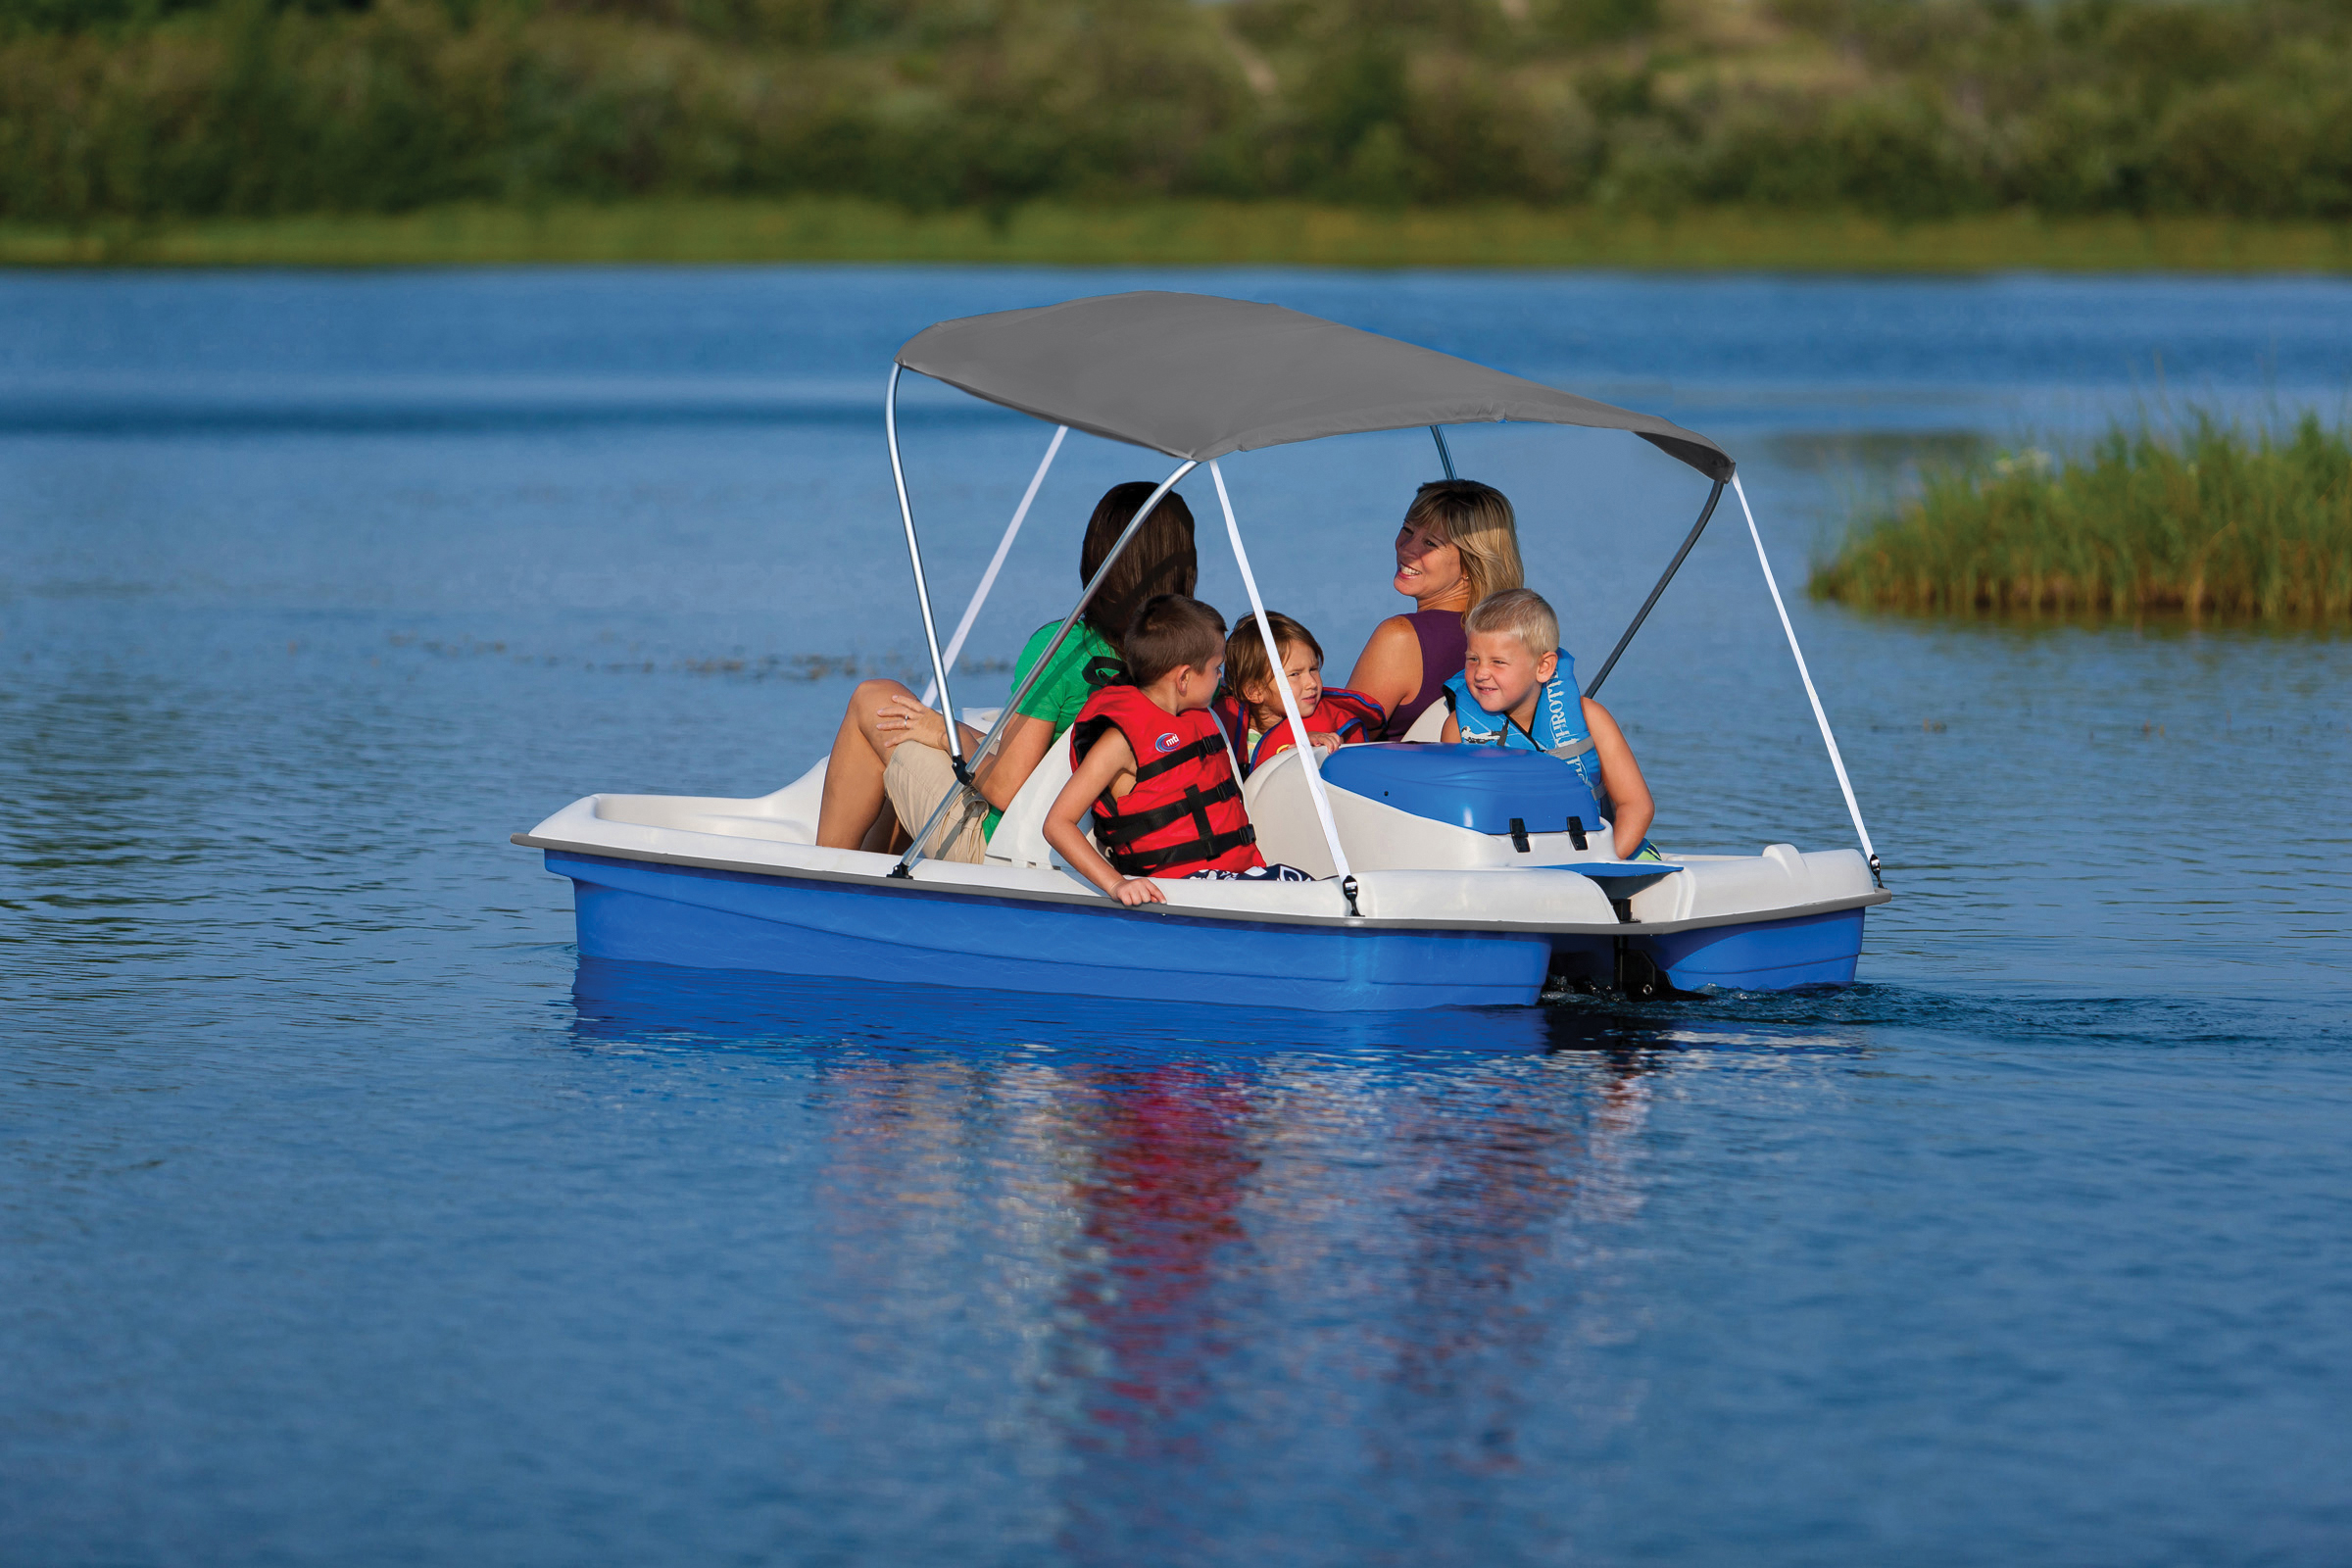 Water Wheeler ASL Electric Pedal Boat with Canopy, Blue - image 3 of 6